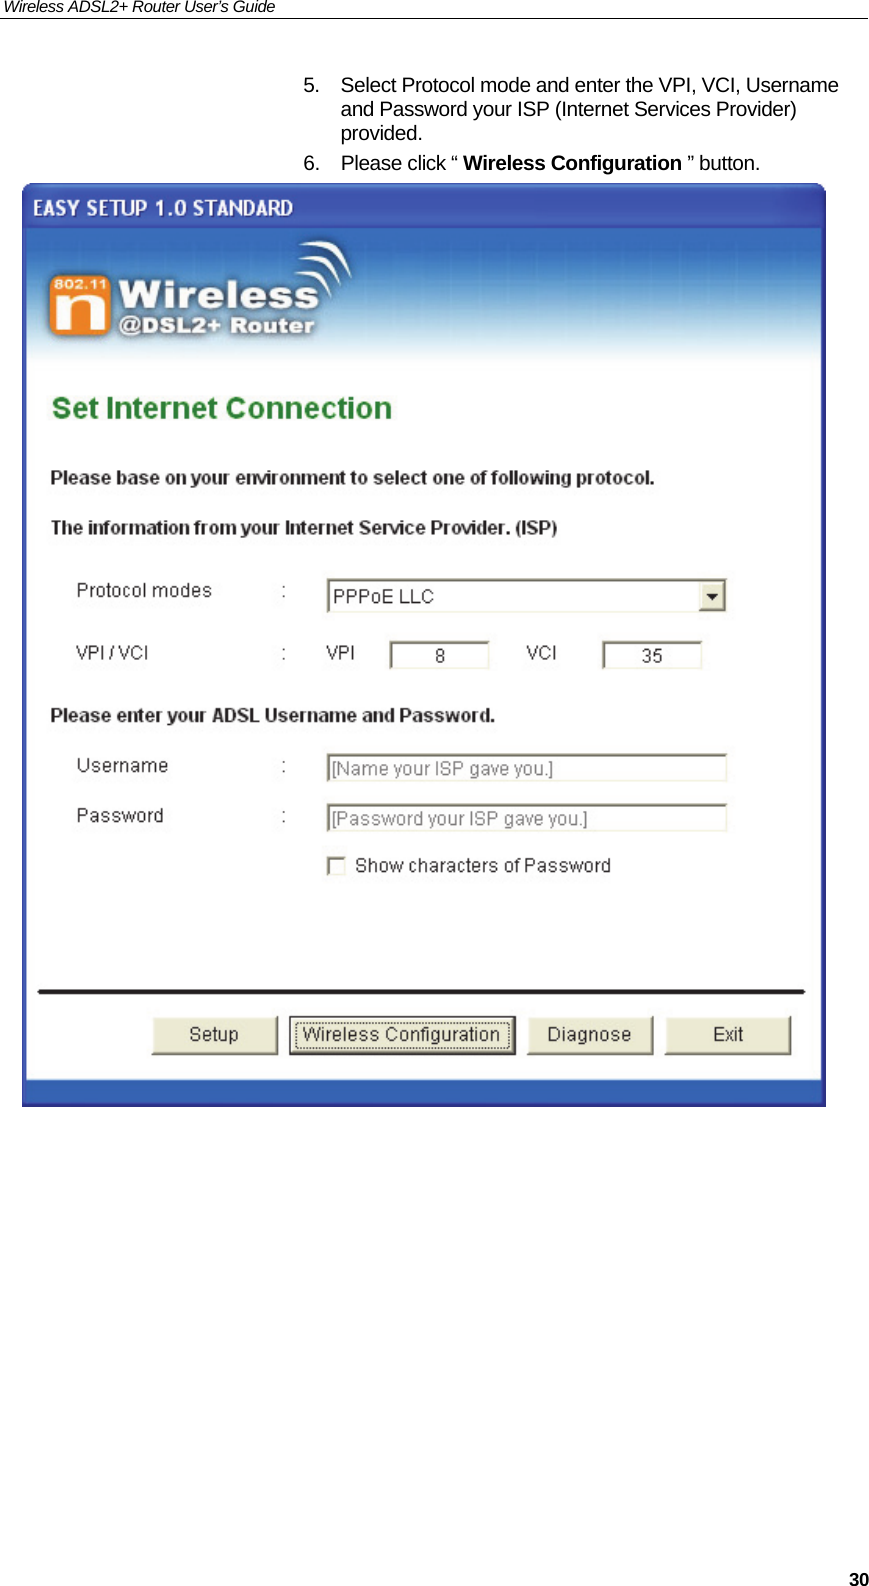 Wireless ADSL2+ Router User’s Guide     305.  Select Protocol mode and enter the VPI, VCI, Username and Password your ISP (Internet Services Provider) provided. 6.  Please click “ Wireless Configuration ” button.            